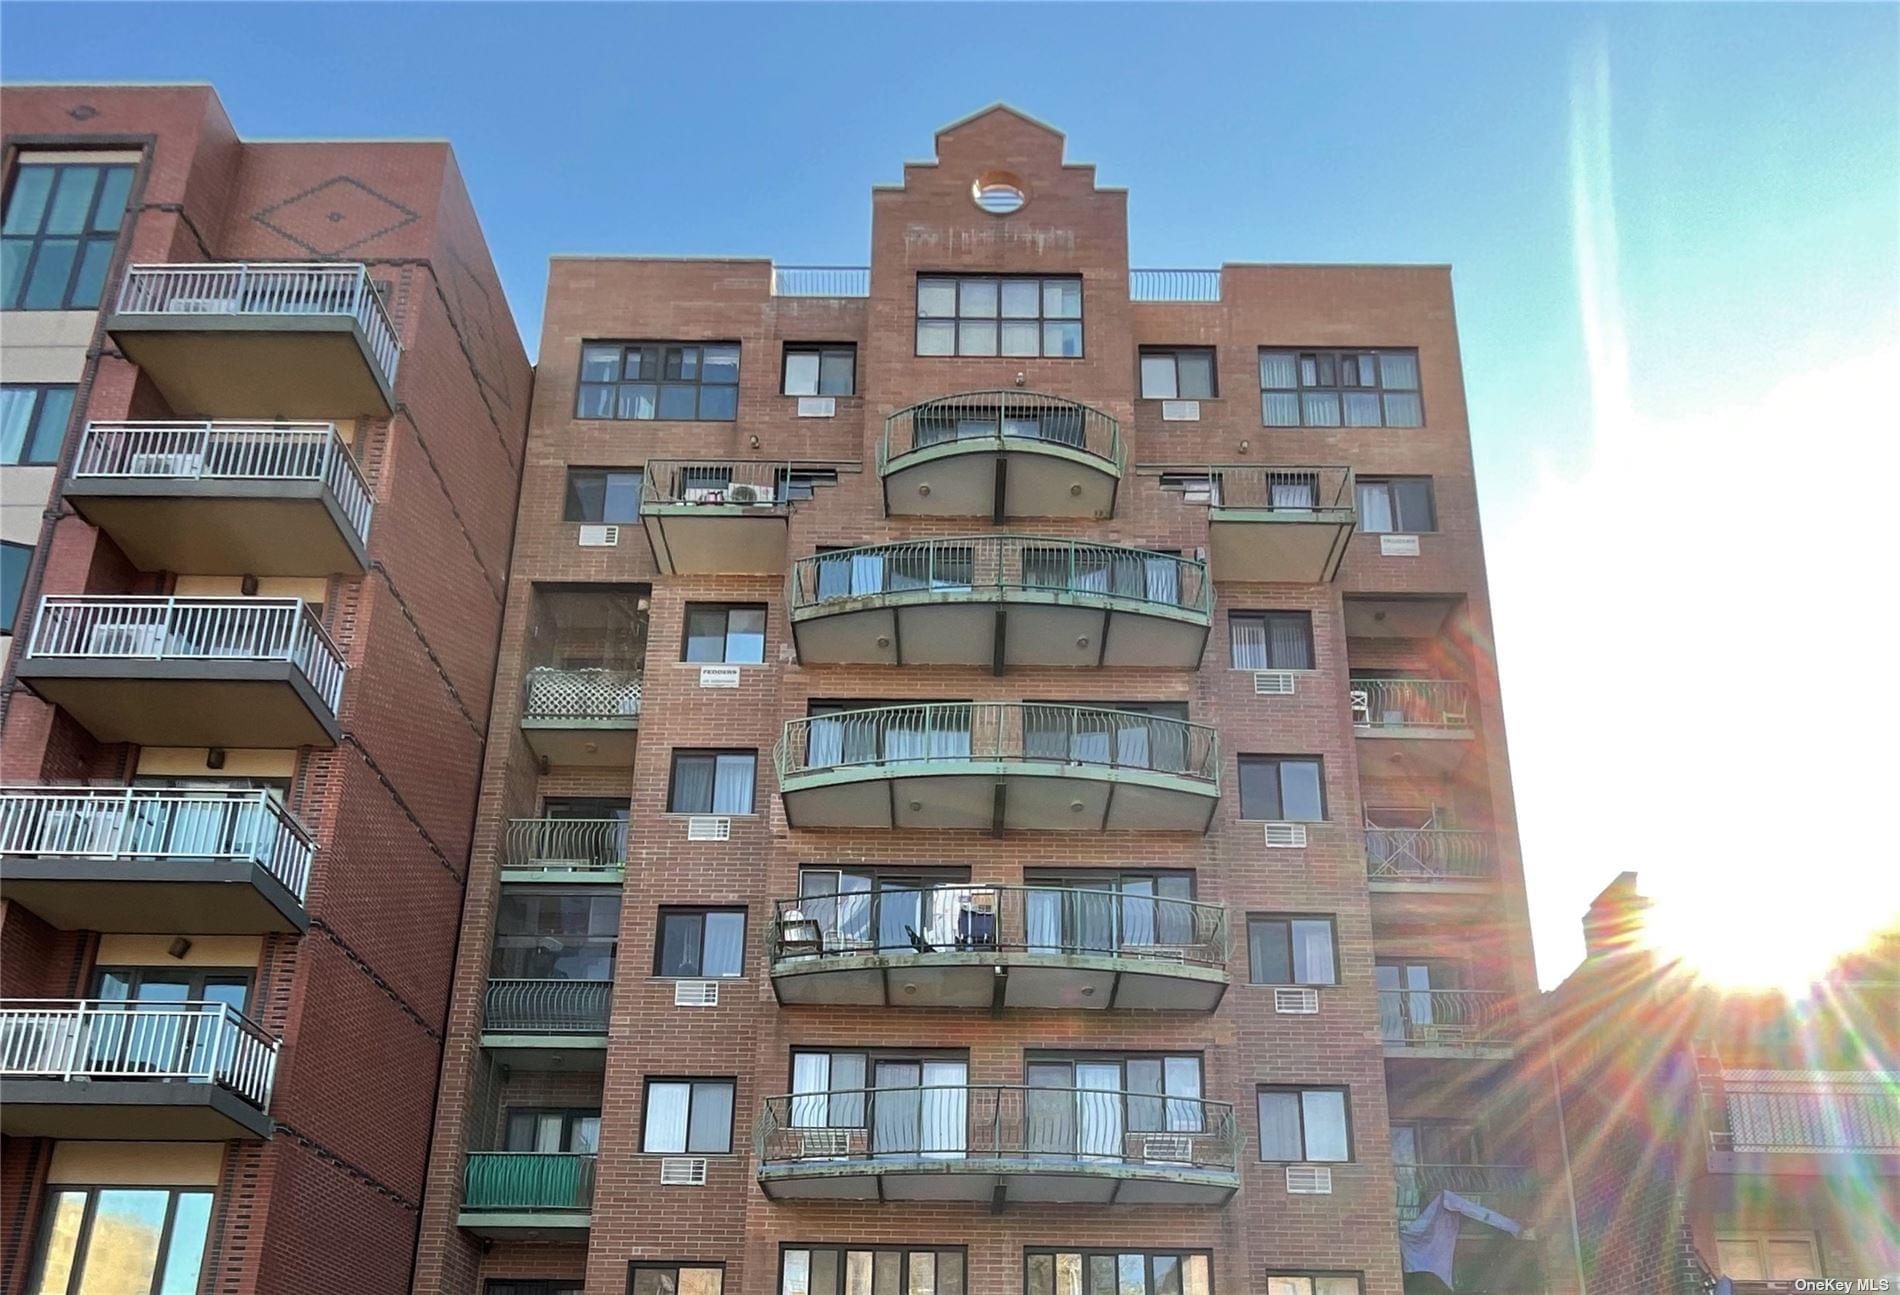 144-48 Roosevelt Avenue #3D in Queens, Flushing, NY 11354